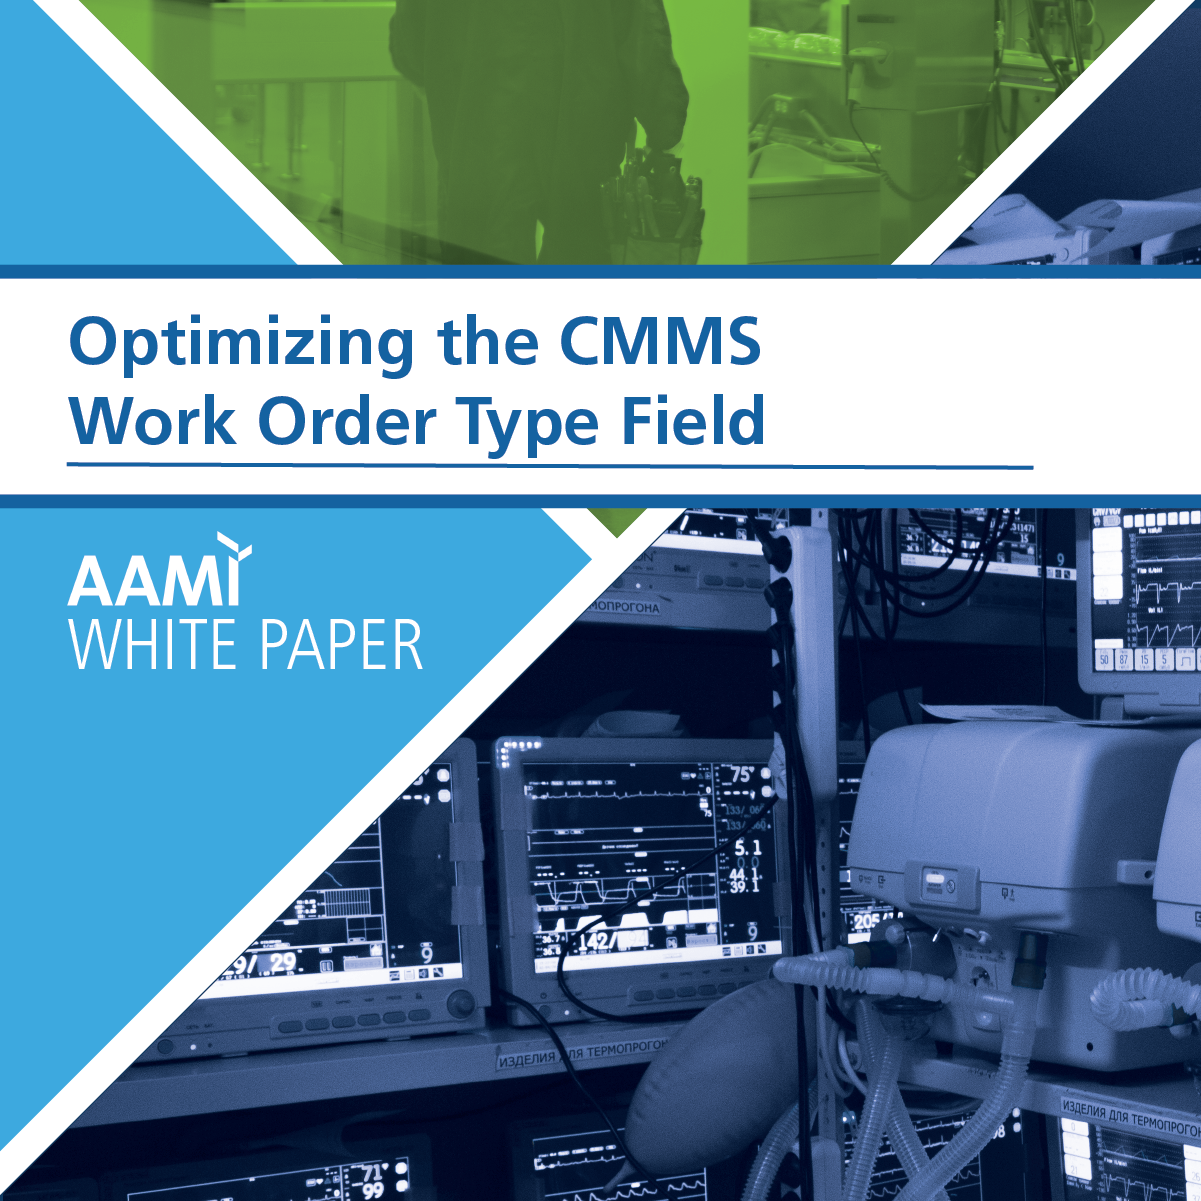 CMMS White Paper - Optimizing the CMMS Work Order Type Field